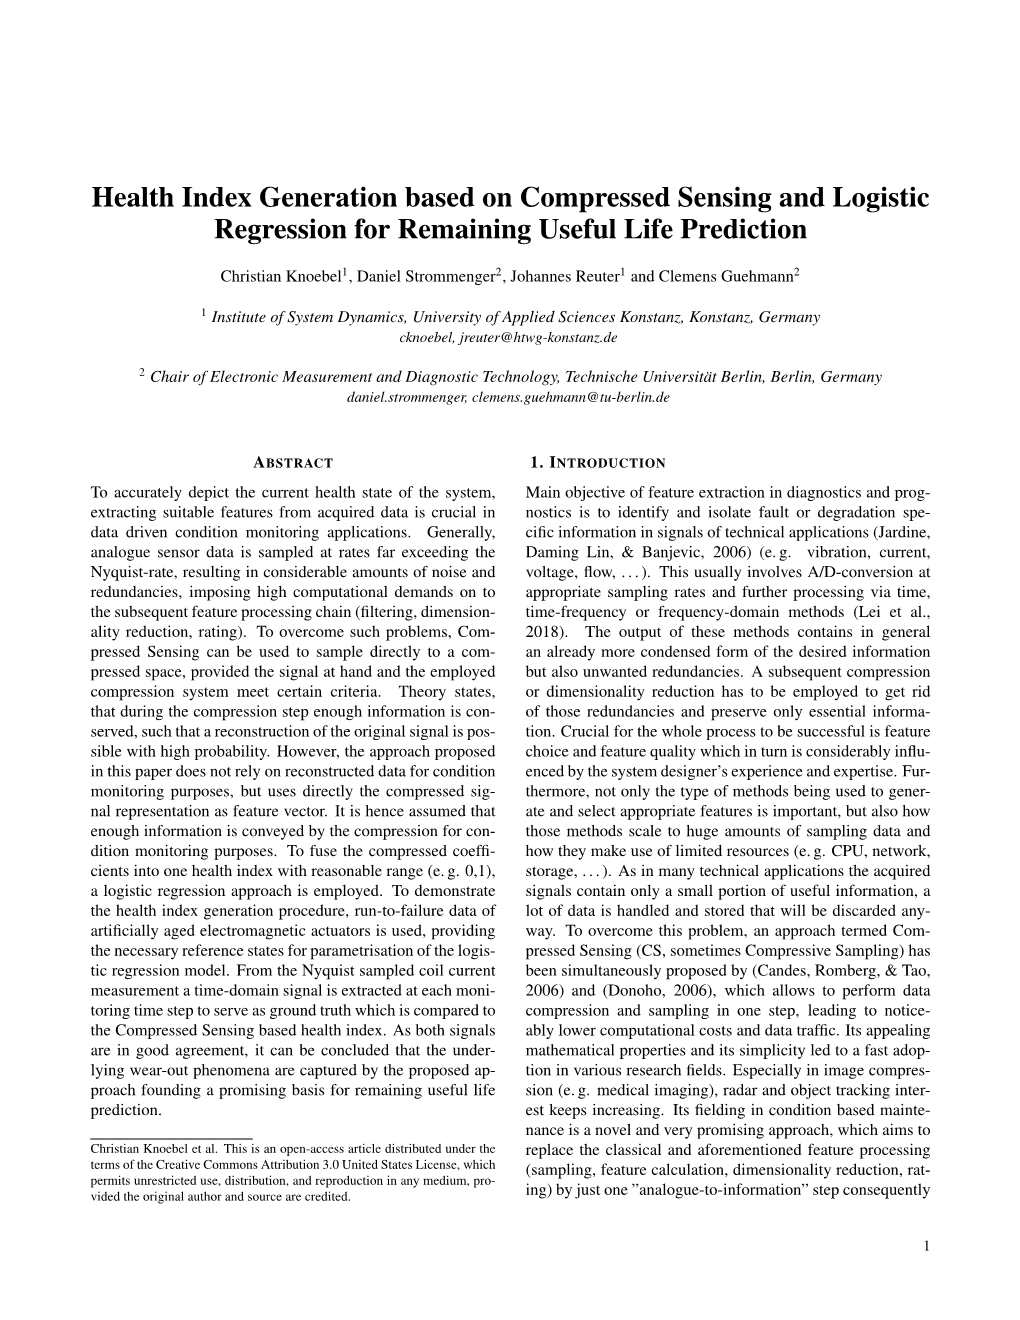 Health Index Generation Based on Compressed Sensing and Logistic Regression for Remaining Useful Life Prediction